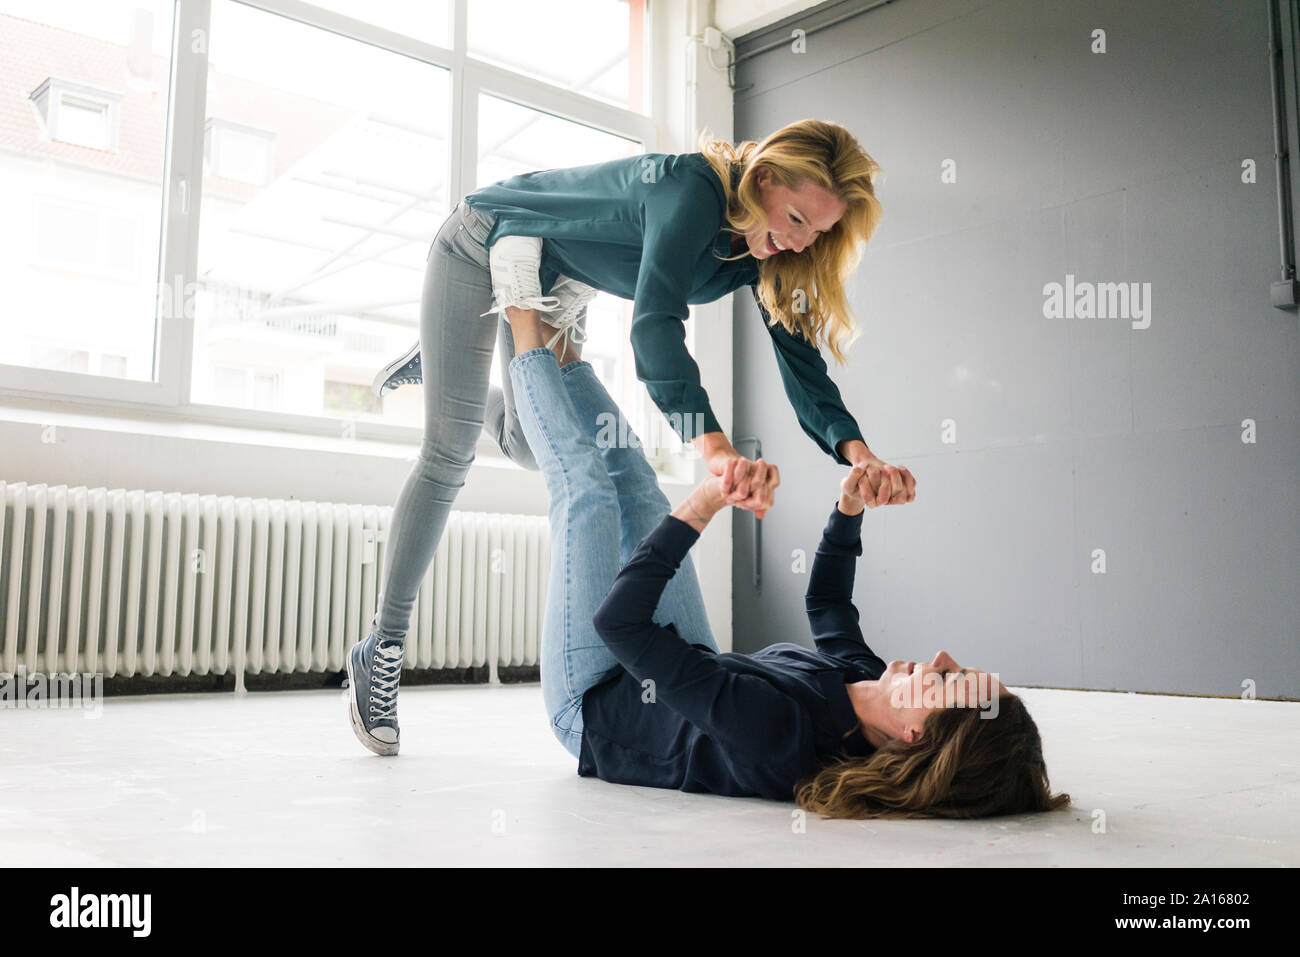 Two young women supporting each other playfully Stock Photo